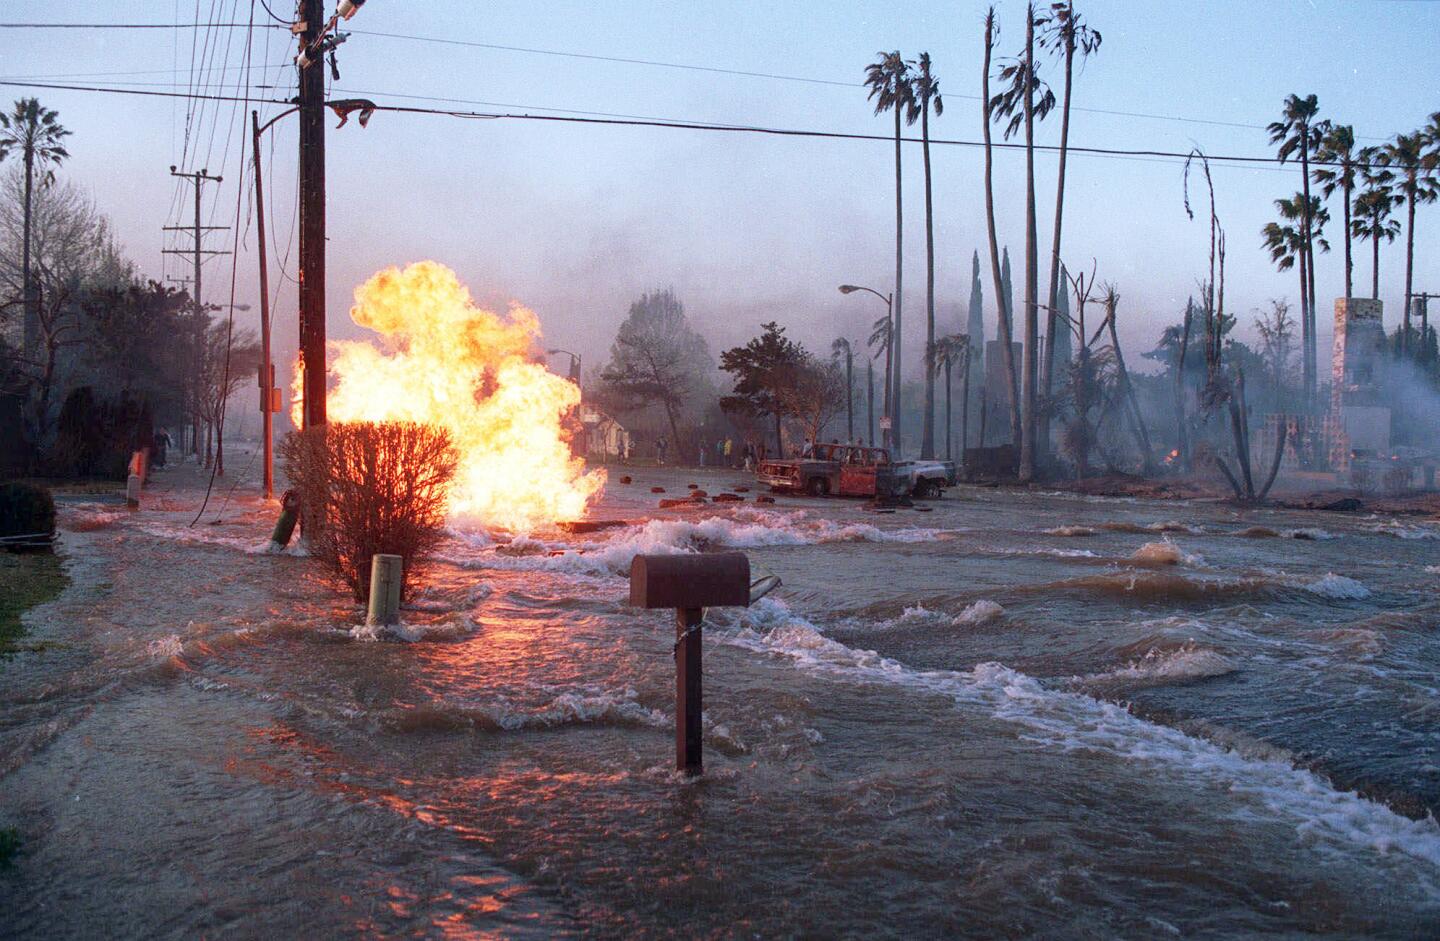 Gas from a ruptured supply line burns as water from a broken water main floods Balboa Boulevard in the Granada Hills area of Los Angeles. The fire from the gas main destroyed two homes, right.